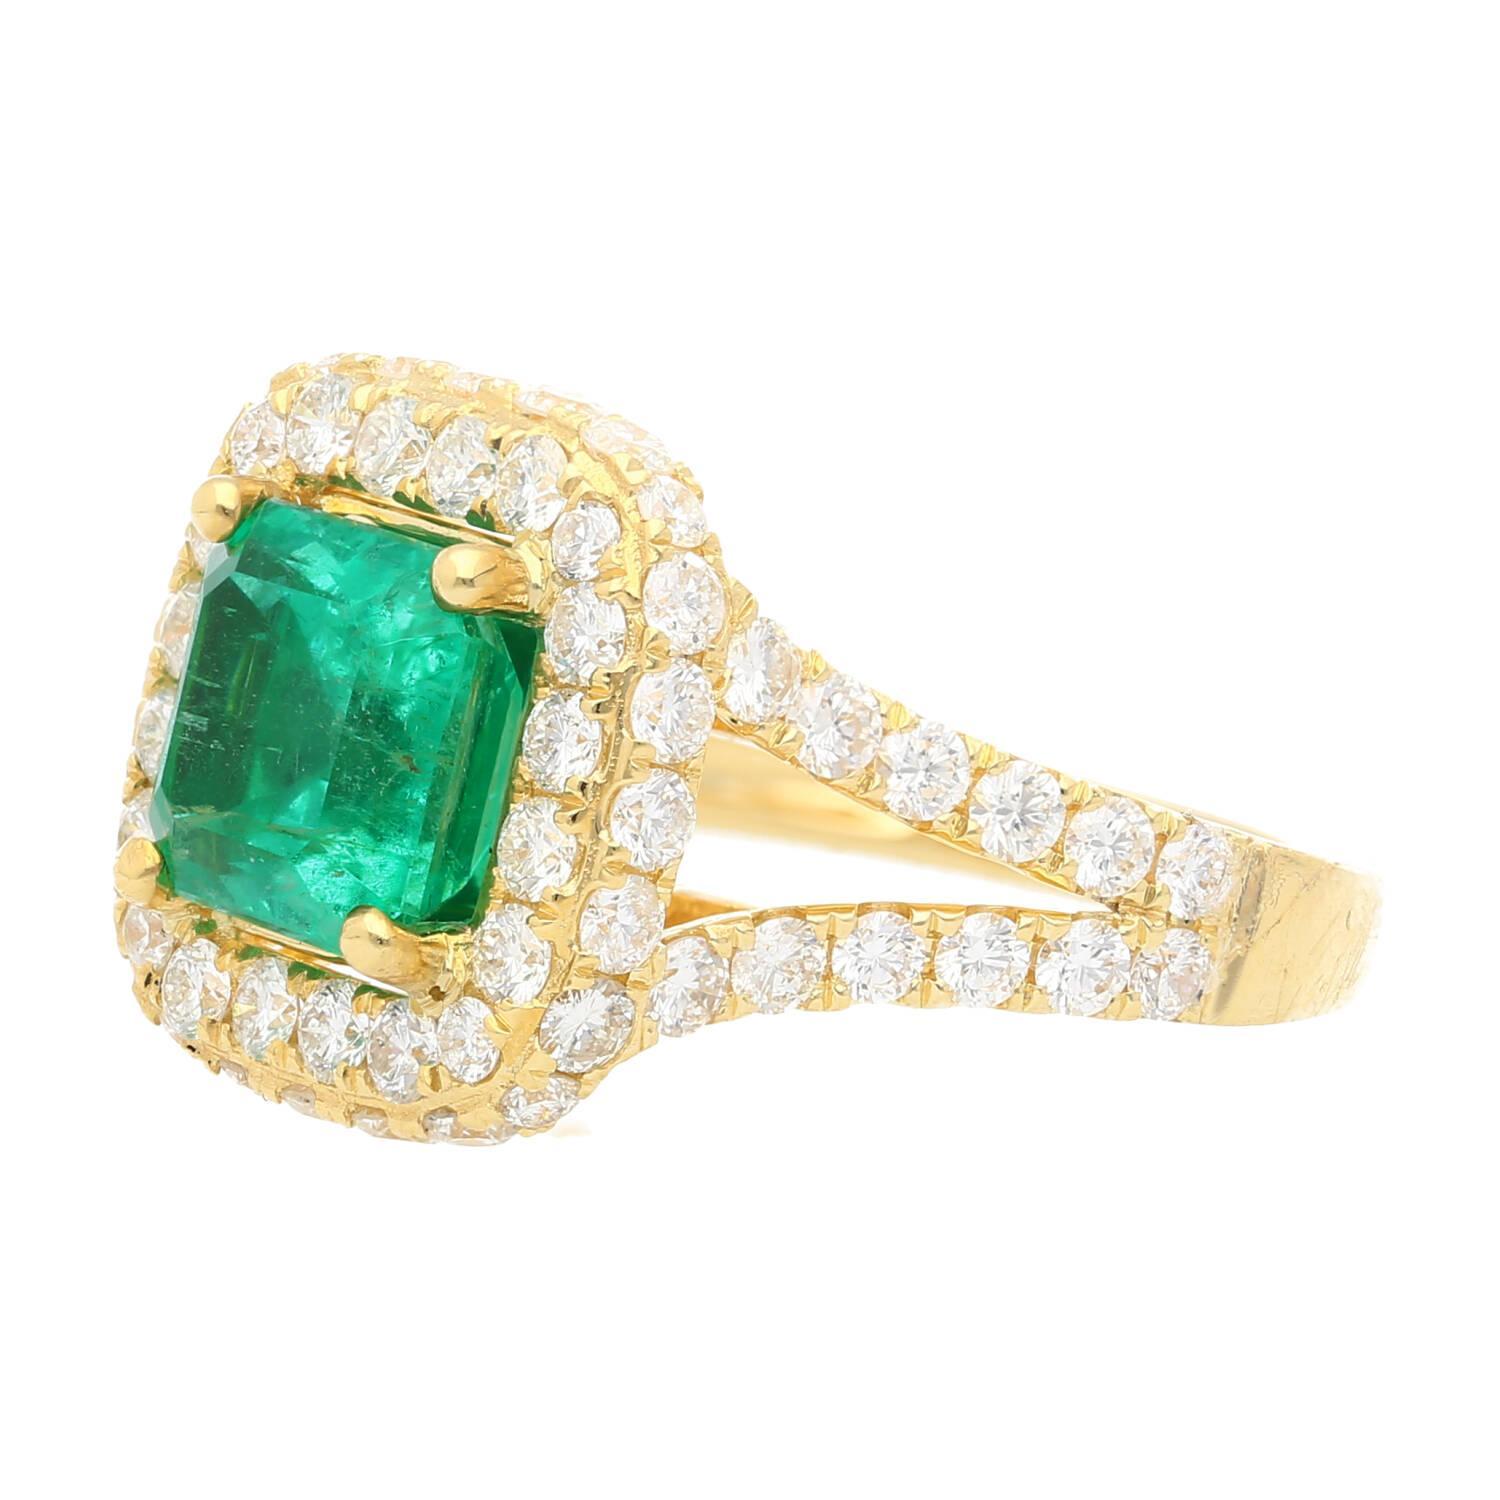 GRS Certified 2.66 Carat Minor Oil Colombian Emerald. Set with a gorgeous round cut diamond halo and diamond set split shank in 18k yellow gold. Offering excellent contrast and symmetry to the already vibrant center stone. 

The center stone is a